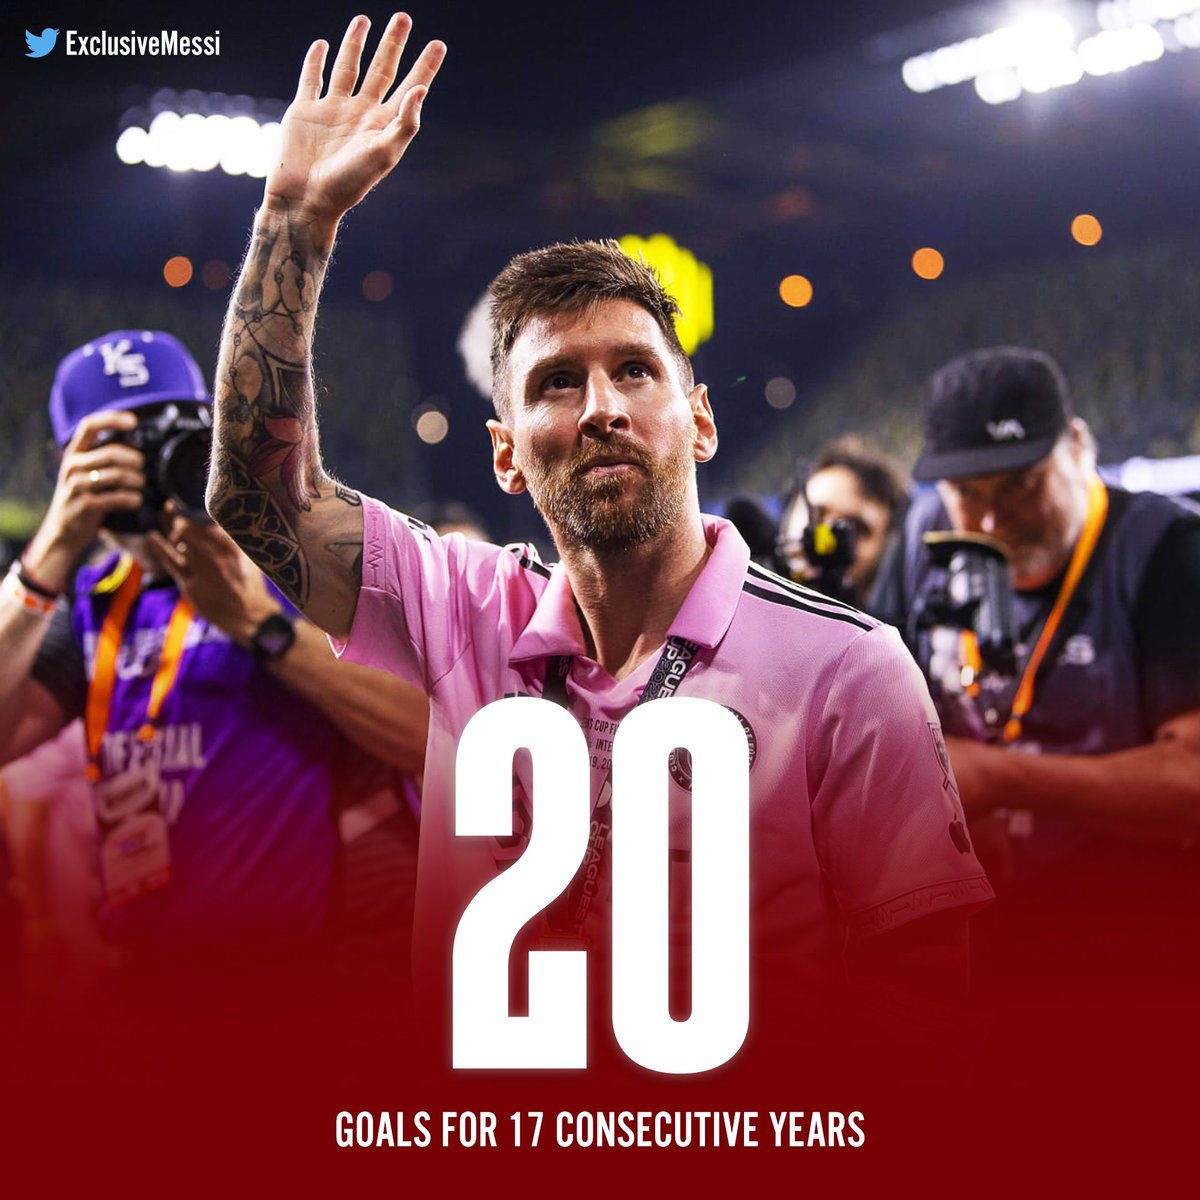 🚨 Lionel Messi has now scored 20+ goals consecutively for the last 17 years of his life. From ages 20 to 36. ✅ 20 ✅ 21 ✅ 22 ✅ 23 ✅ 24 ✅ 25 ✅ 26 ✅ 27 ✅ 28 ✅ 29 ✅ 30 ✅ 31 ✅ 32 ✅ 33 ✅ 34 ✅ 35 ✅ 36 No other player has ever done this 🐐